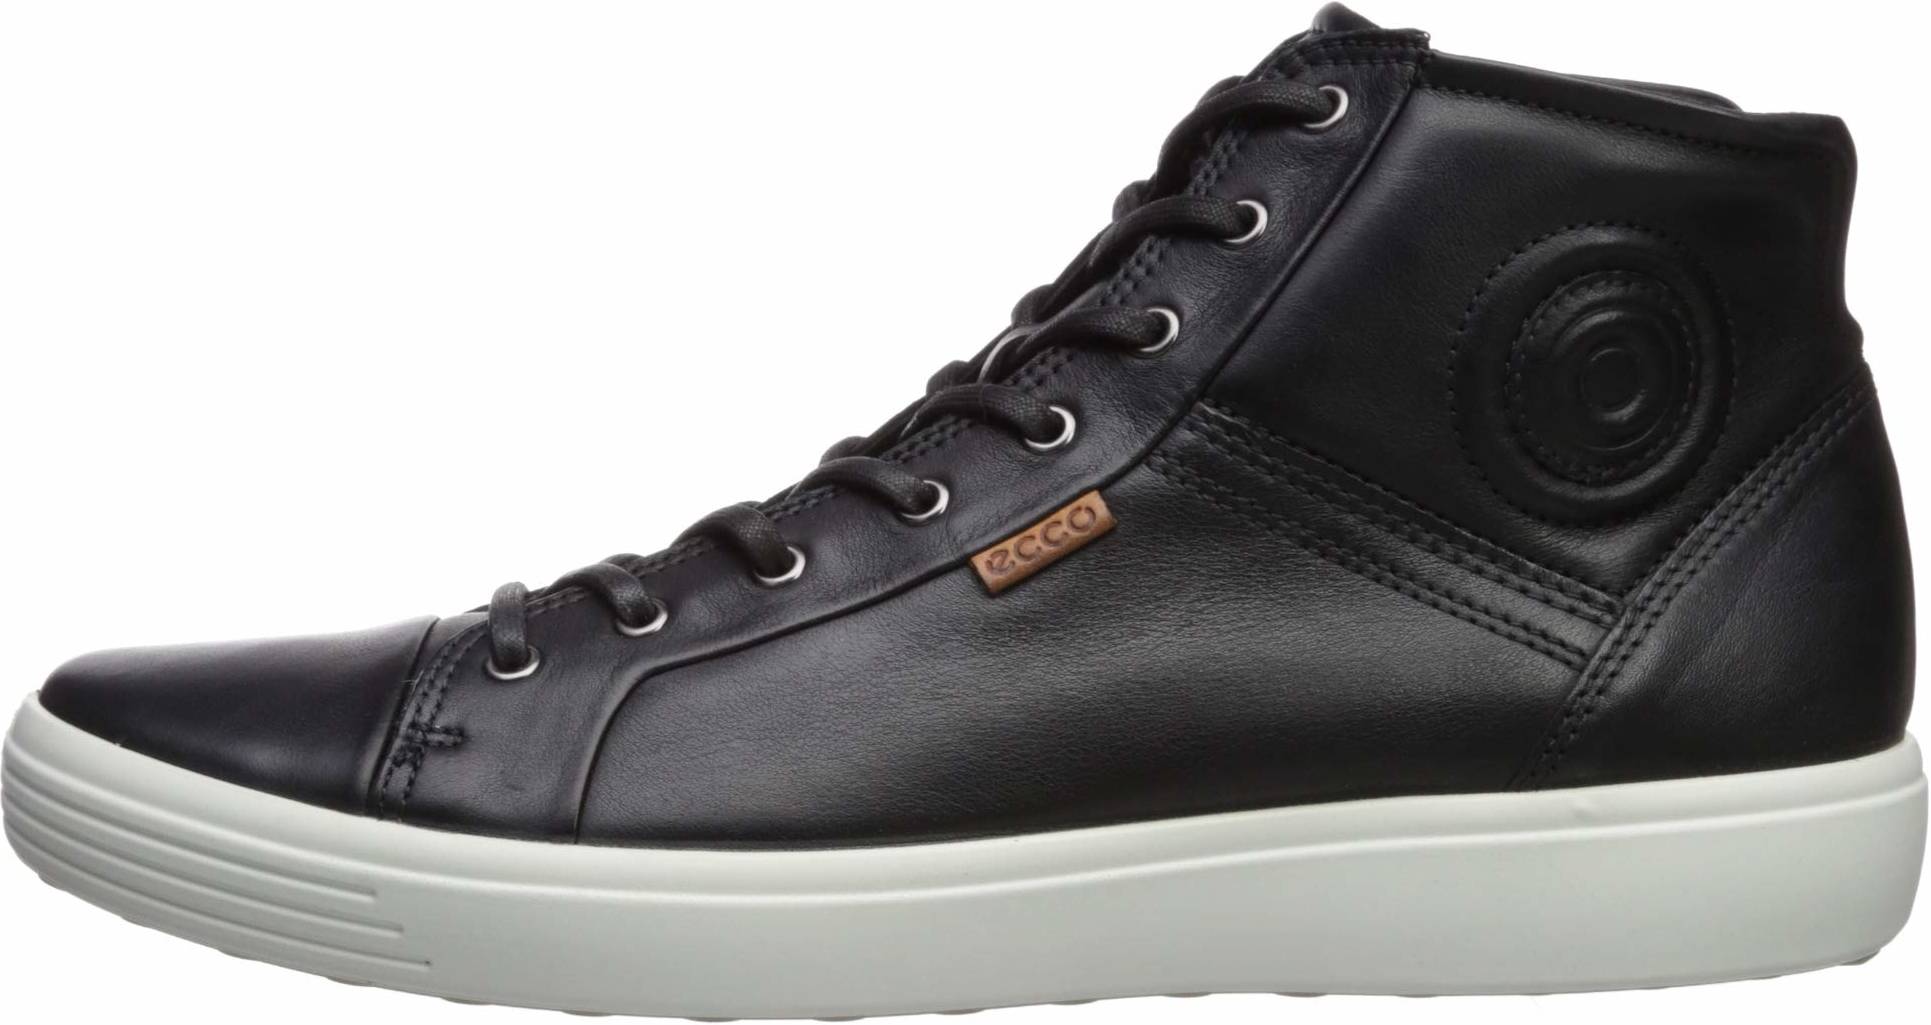 $229 + Review of Ecco Soft 7 High Top 